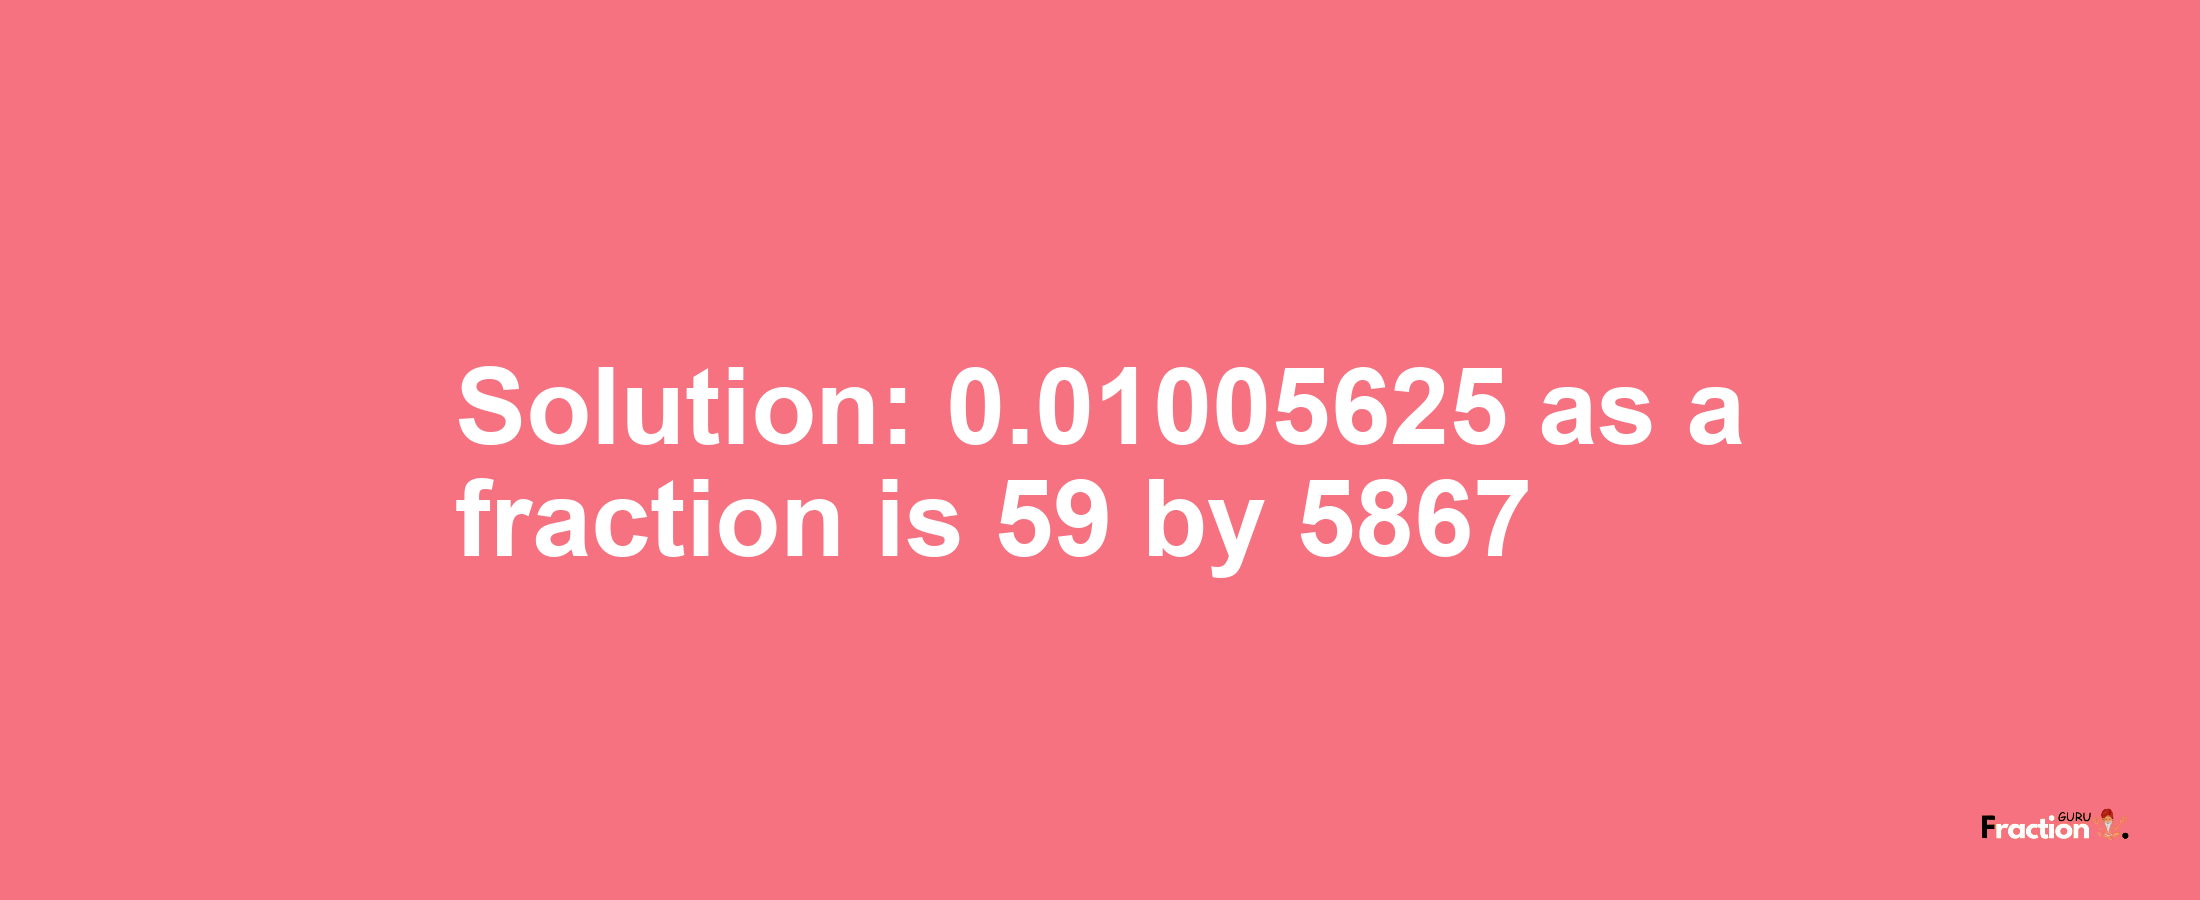 Solution:0.01005625 as a fraction is 59/5867